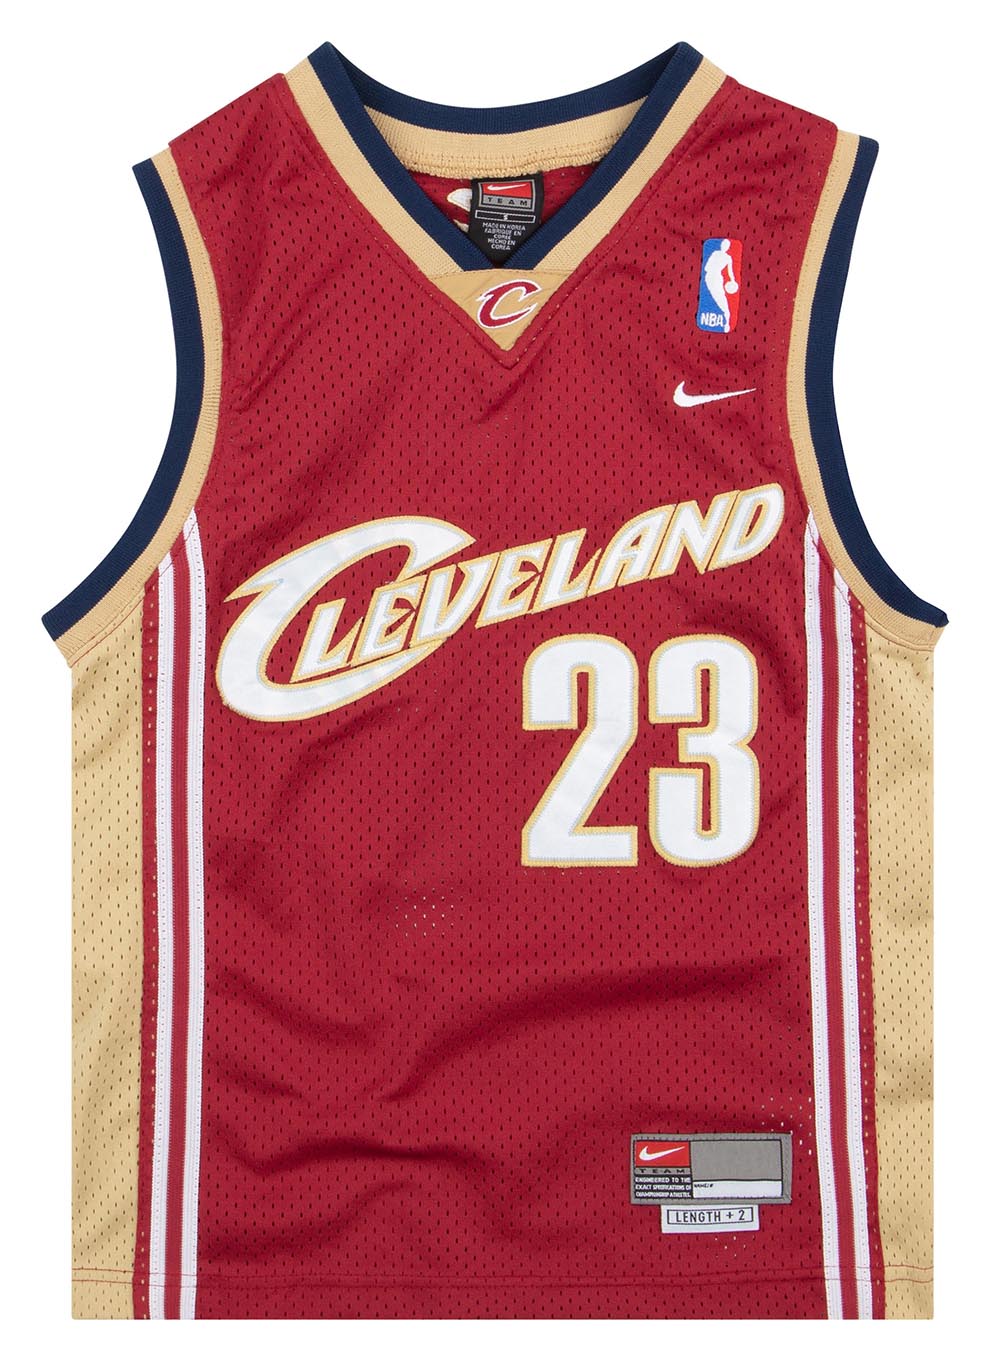 NBA Jersey Database, Cleveland Cavaliers 2003-2010 Record: 349-225